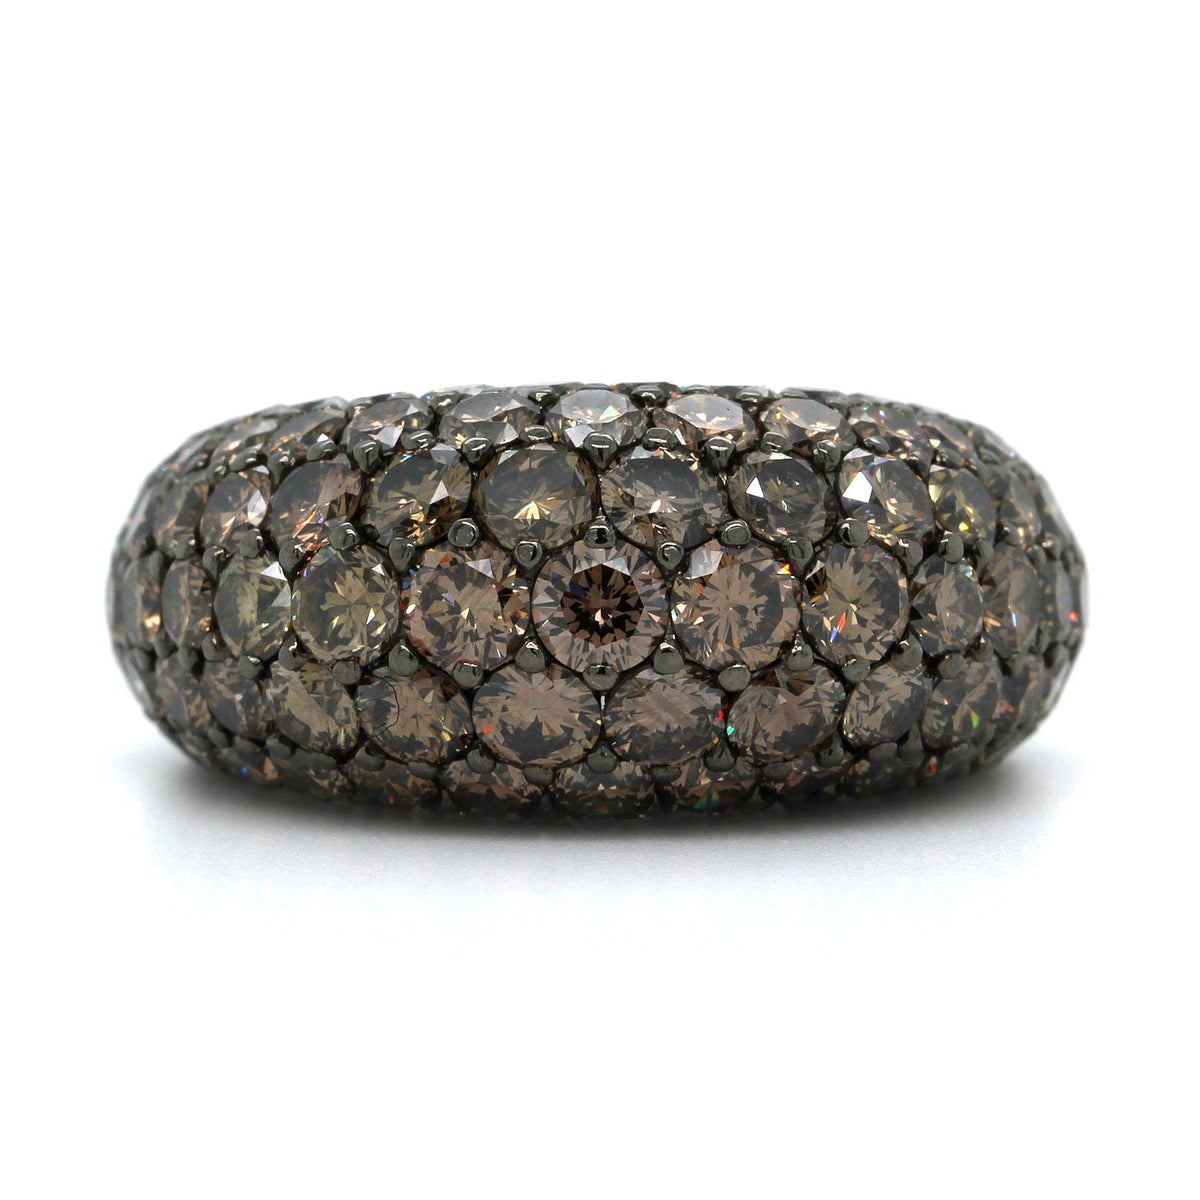 18K White Gold Pave Champagne Diamond Dome Ring